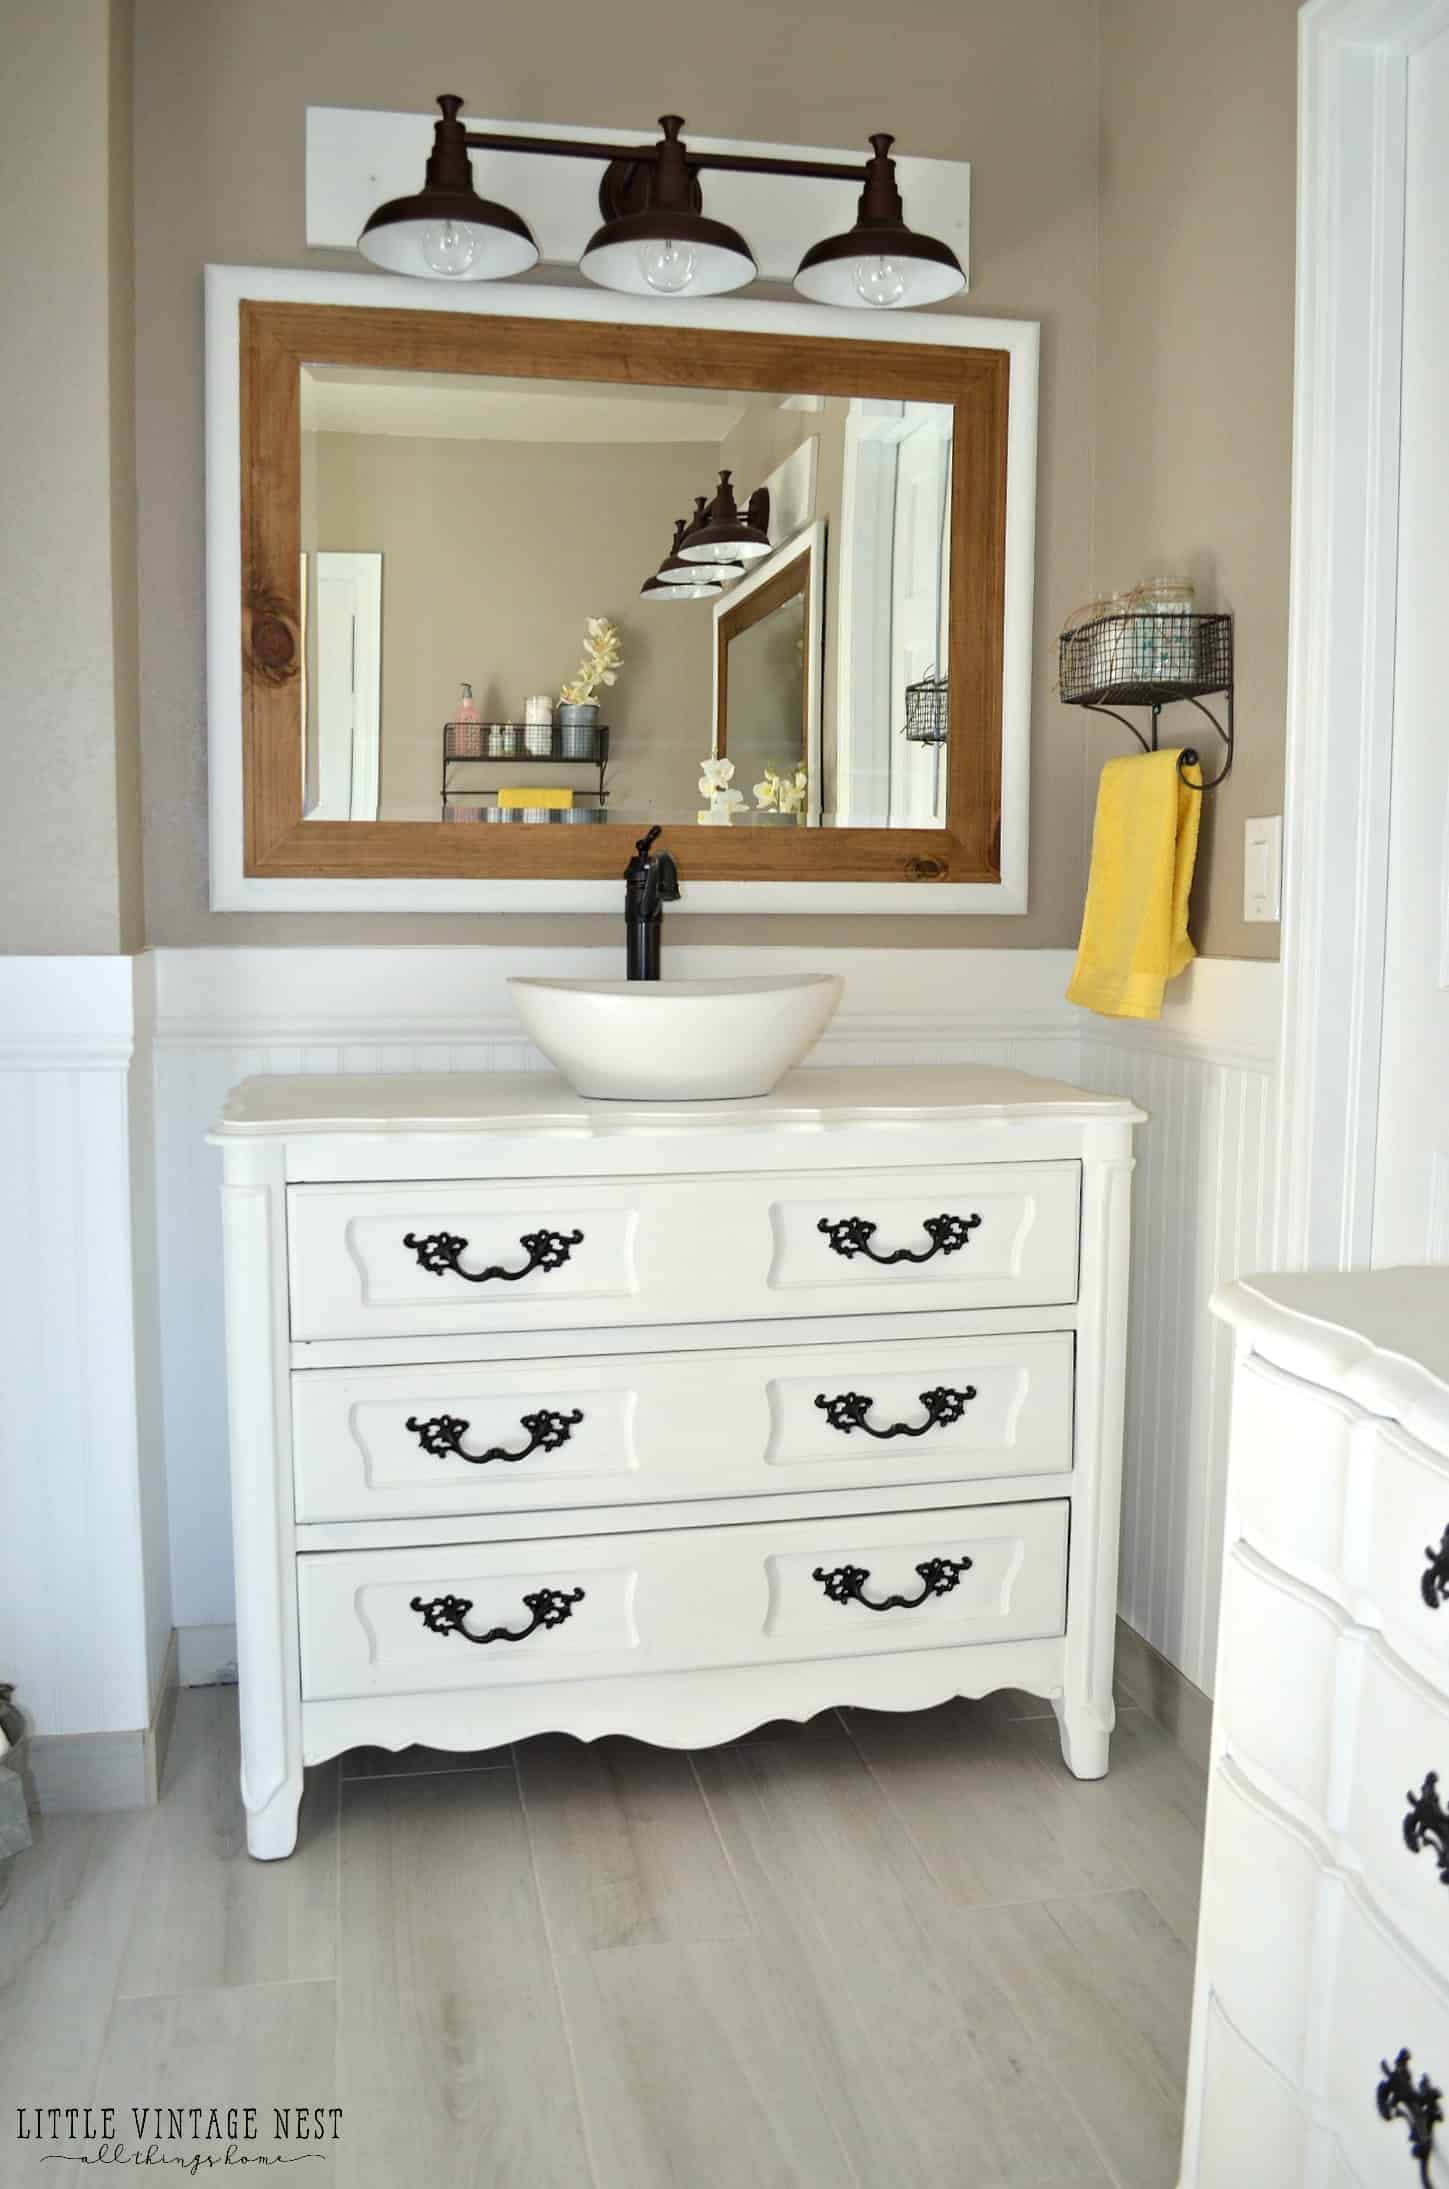 Get inspired by this vintage look in a bathroom remodel with modern fixers that provides great contrast